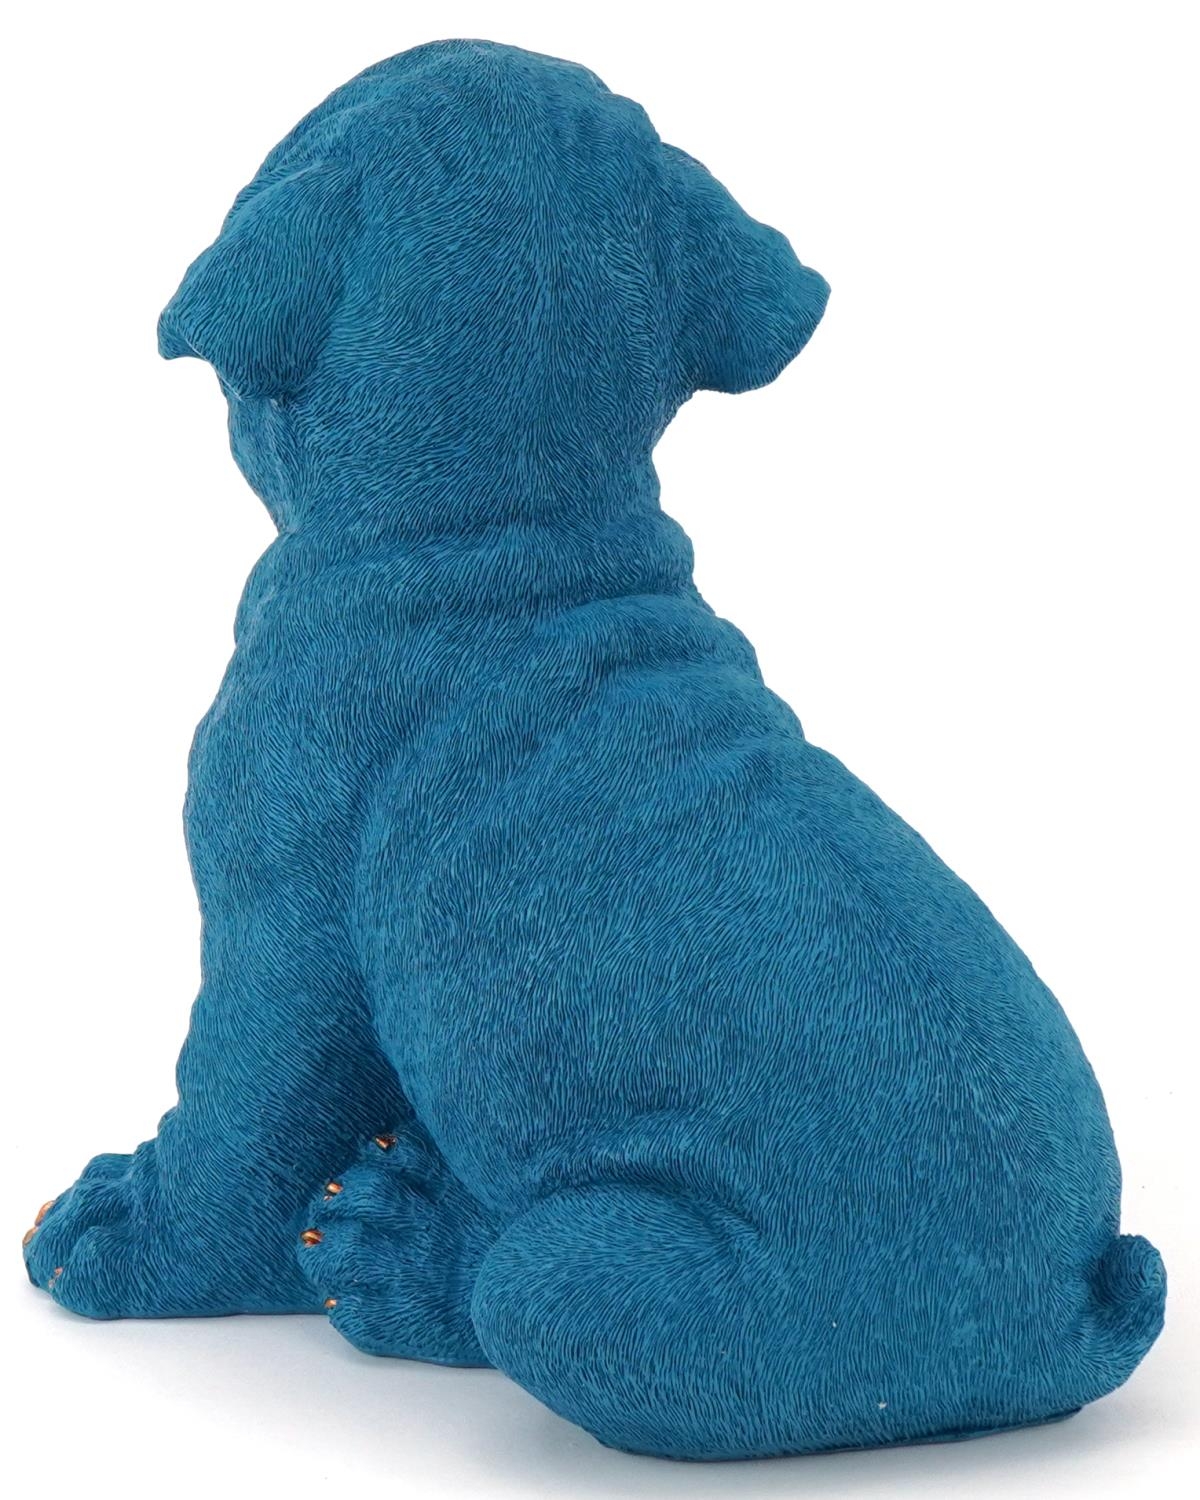 Novelty blue painted model of a comical happy dog, 27cm high - Image 2 of 3